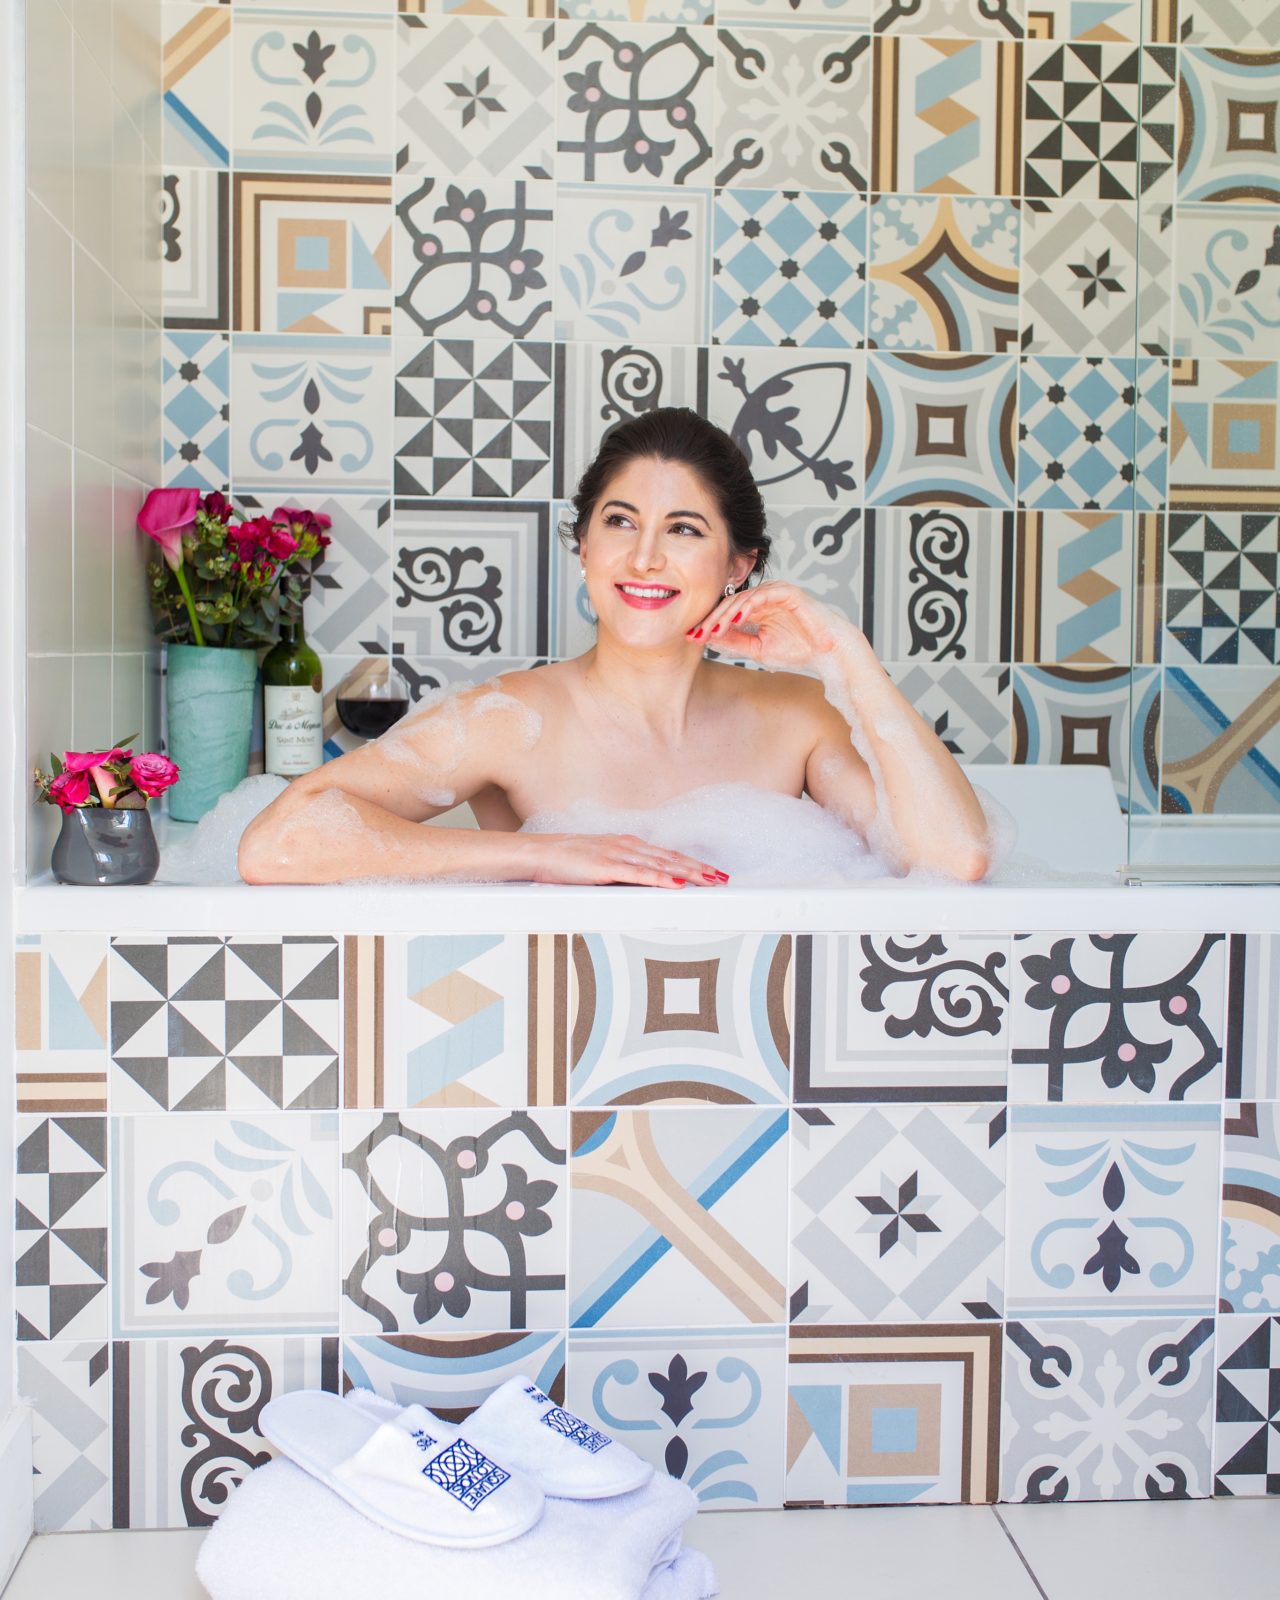 5 Self-Care Ideas to Do Today by Lifestyle Blogger Laura Lily, Self-Care Ideas, DIY Spa Tips,